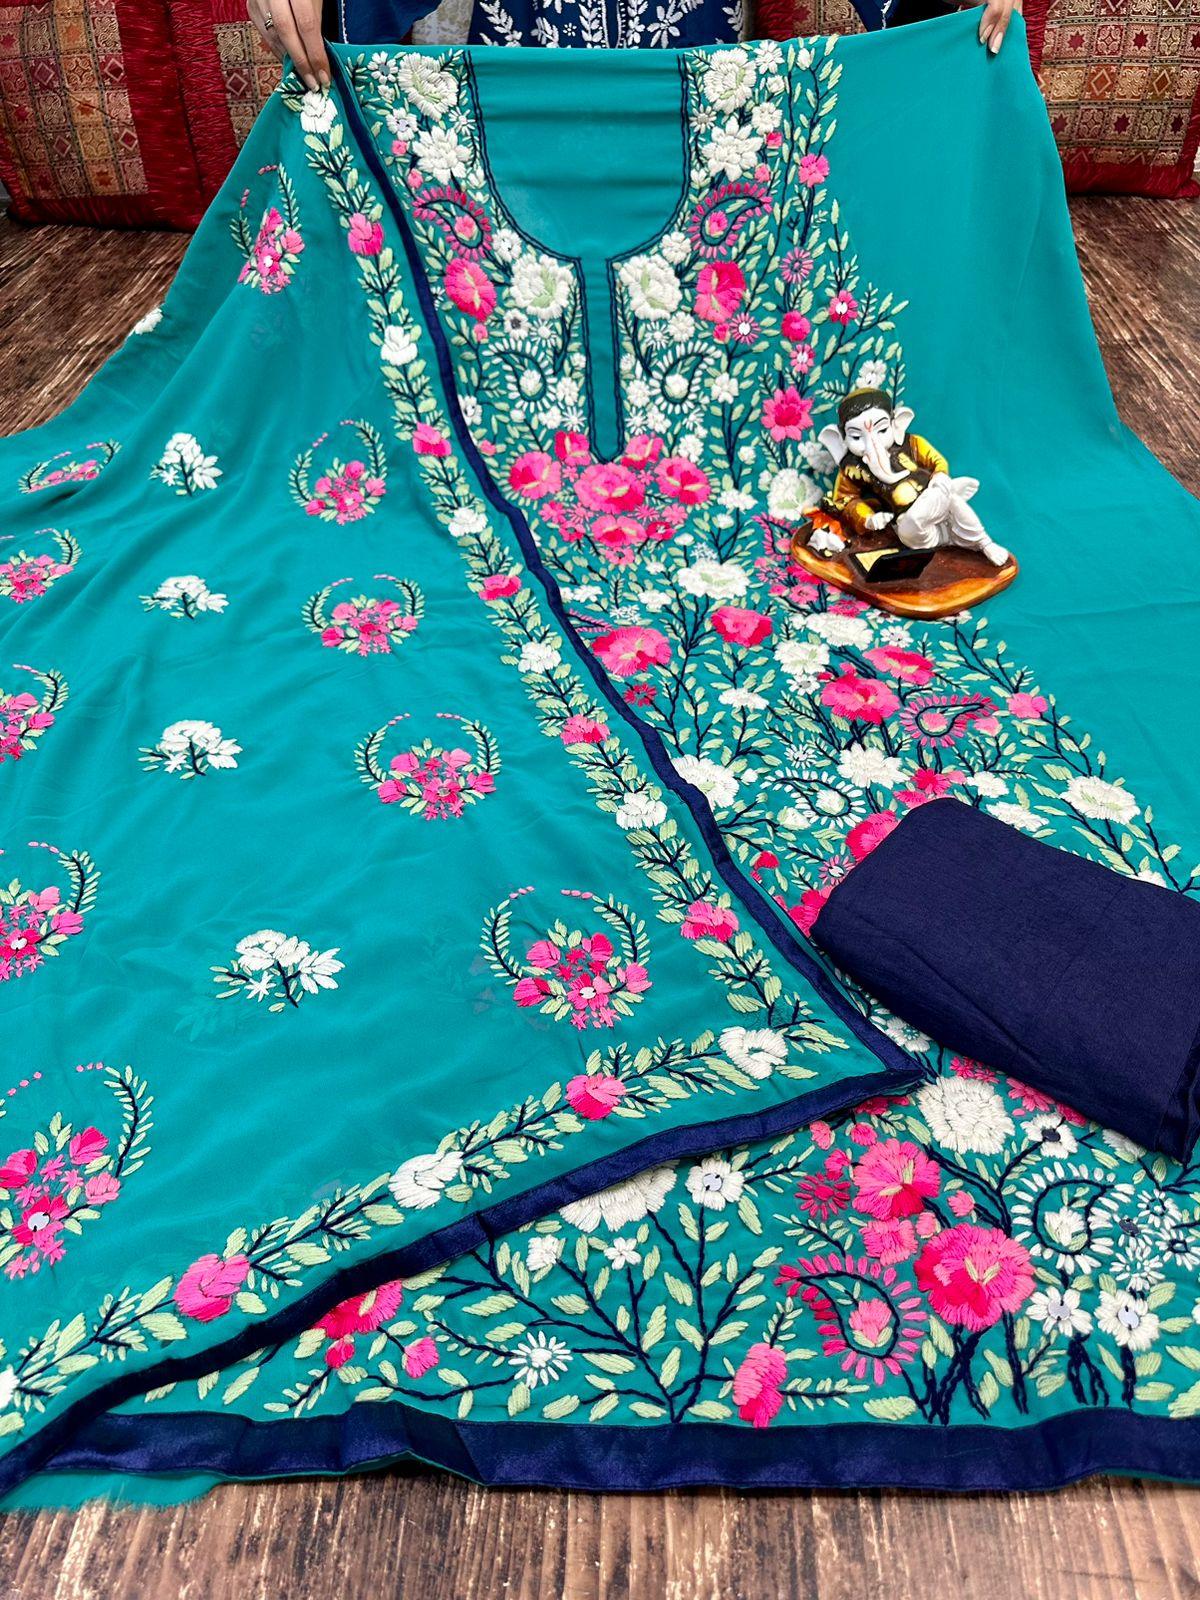 Blue Super Georgette Phulkari Suits with Beautiful Embroidery Shopping Online - Inayakhan Shop 